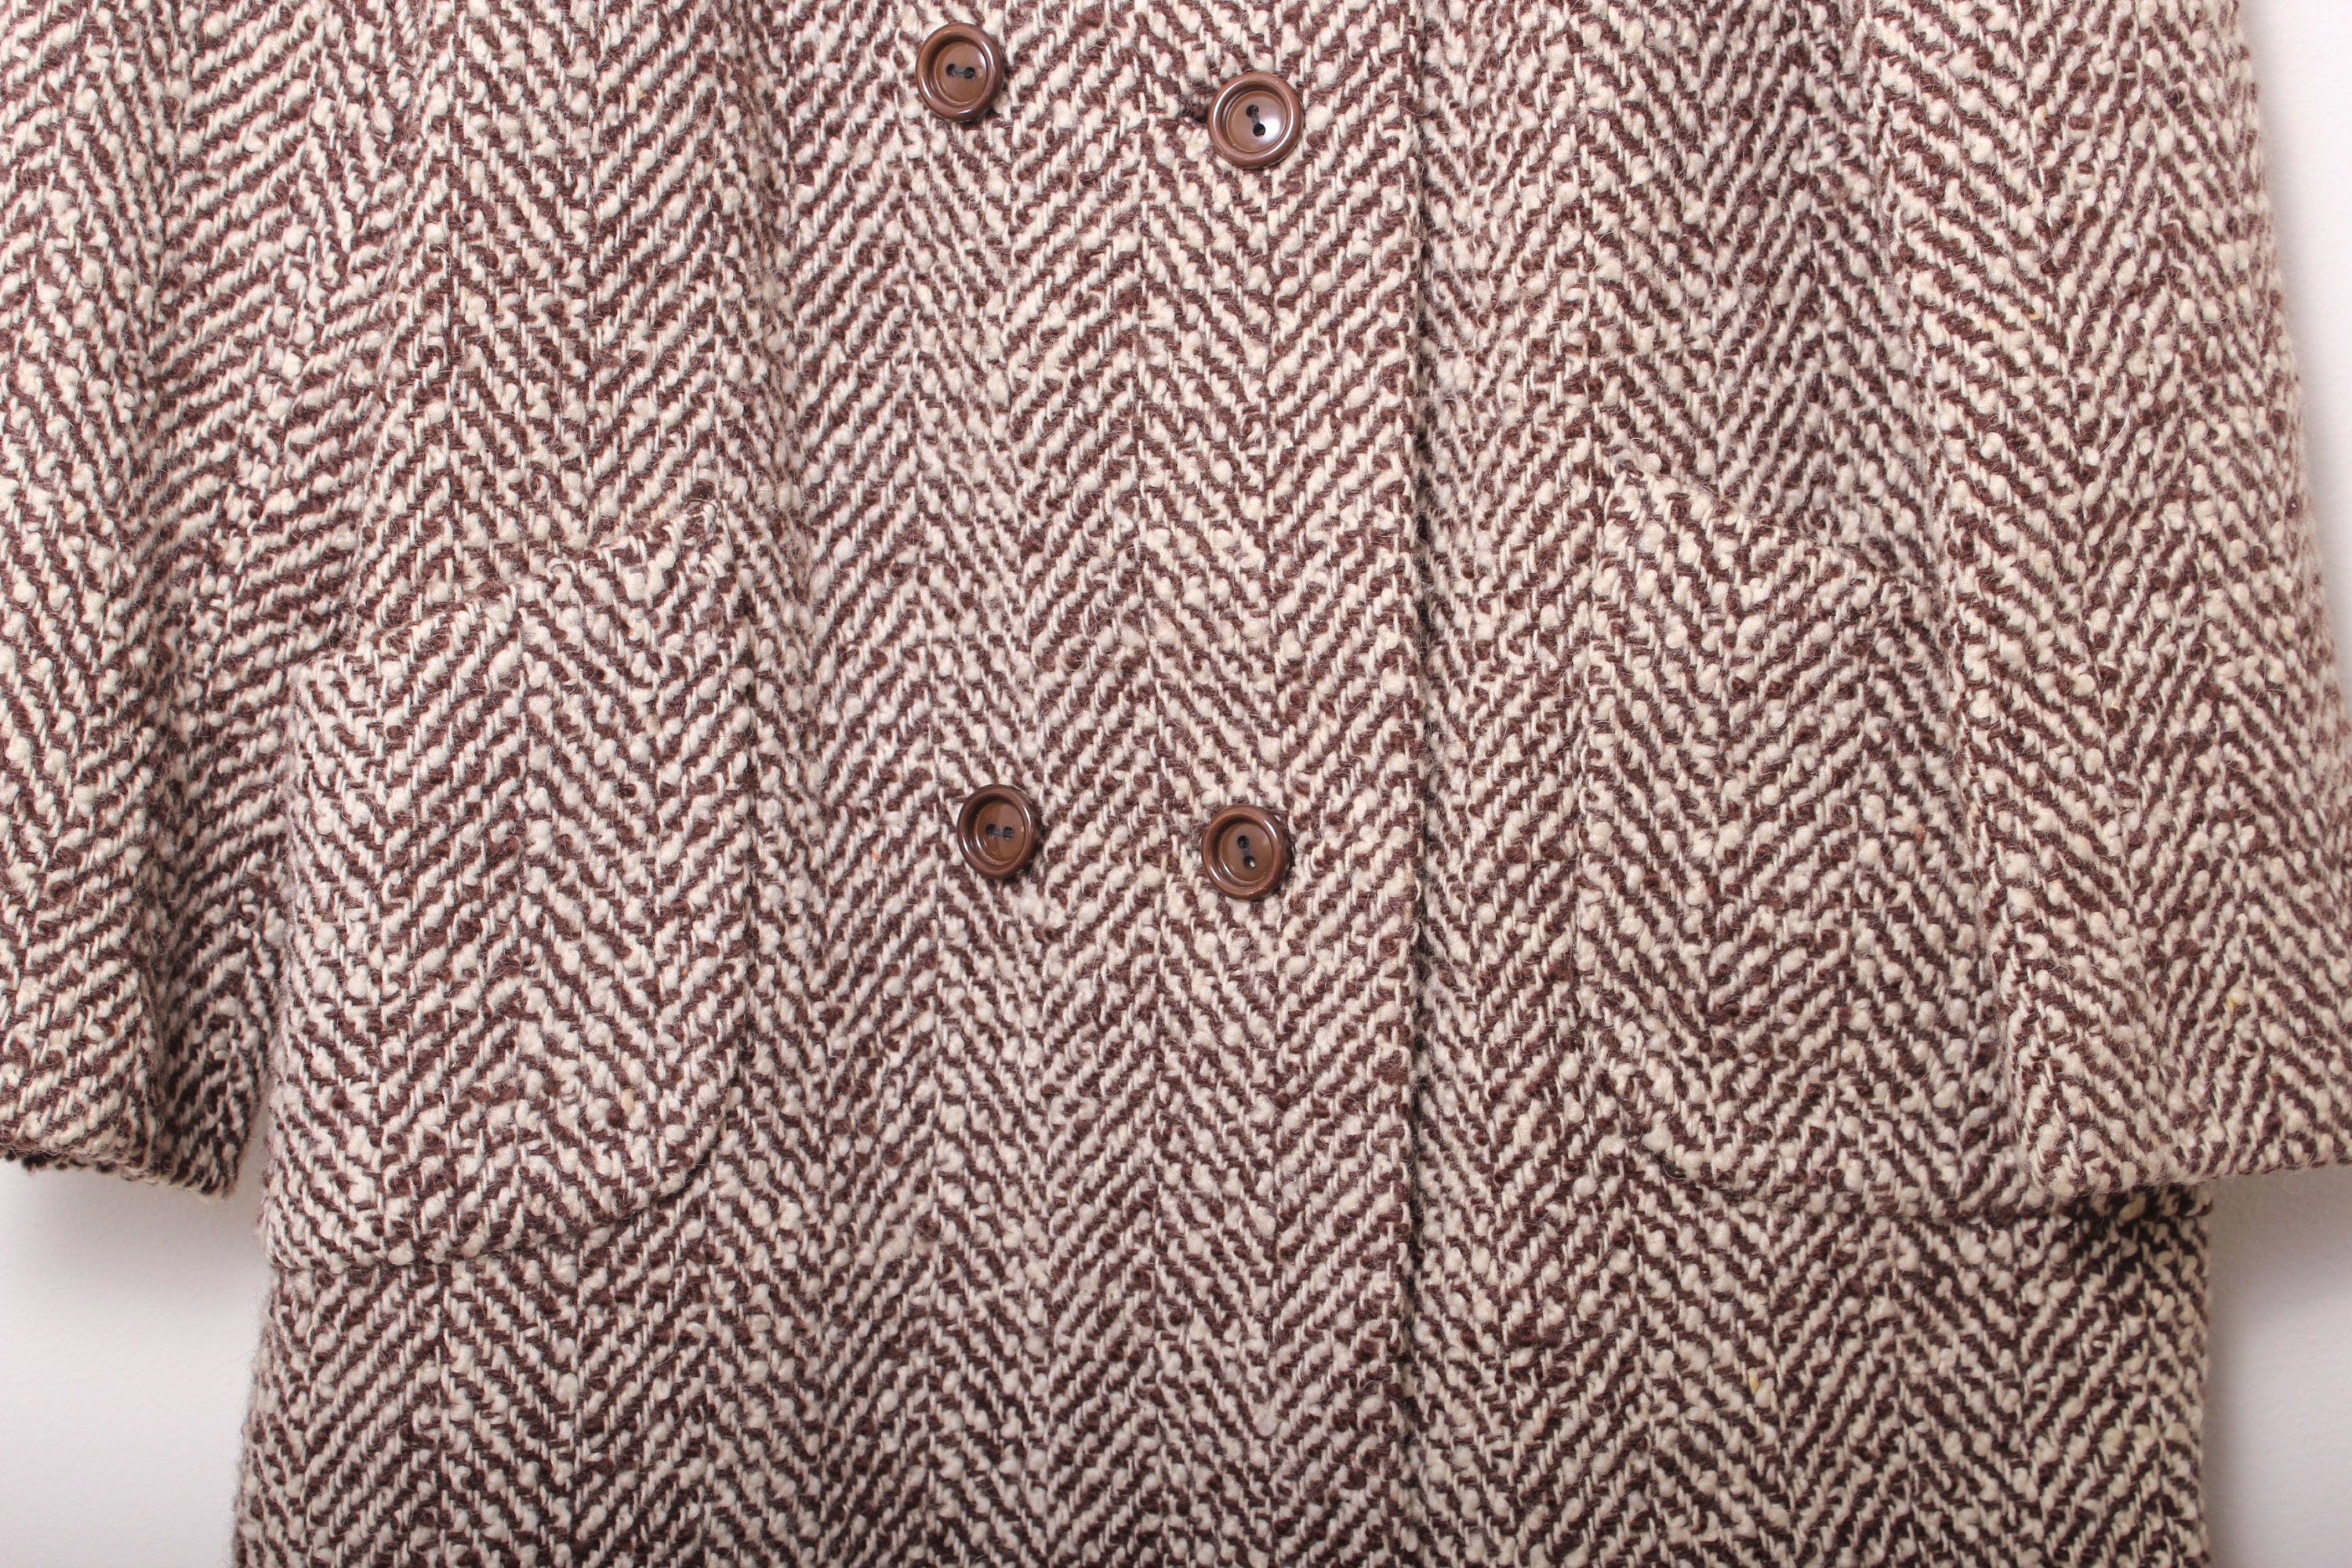 RARE Vintage 50s 60s Colette Modes Donegal Handwoven Tweed - Etsy